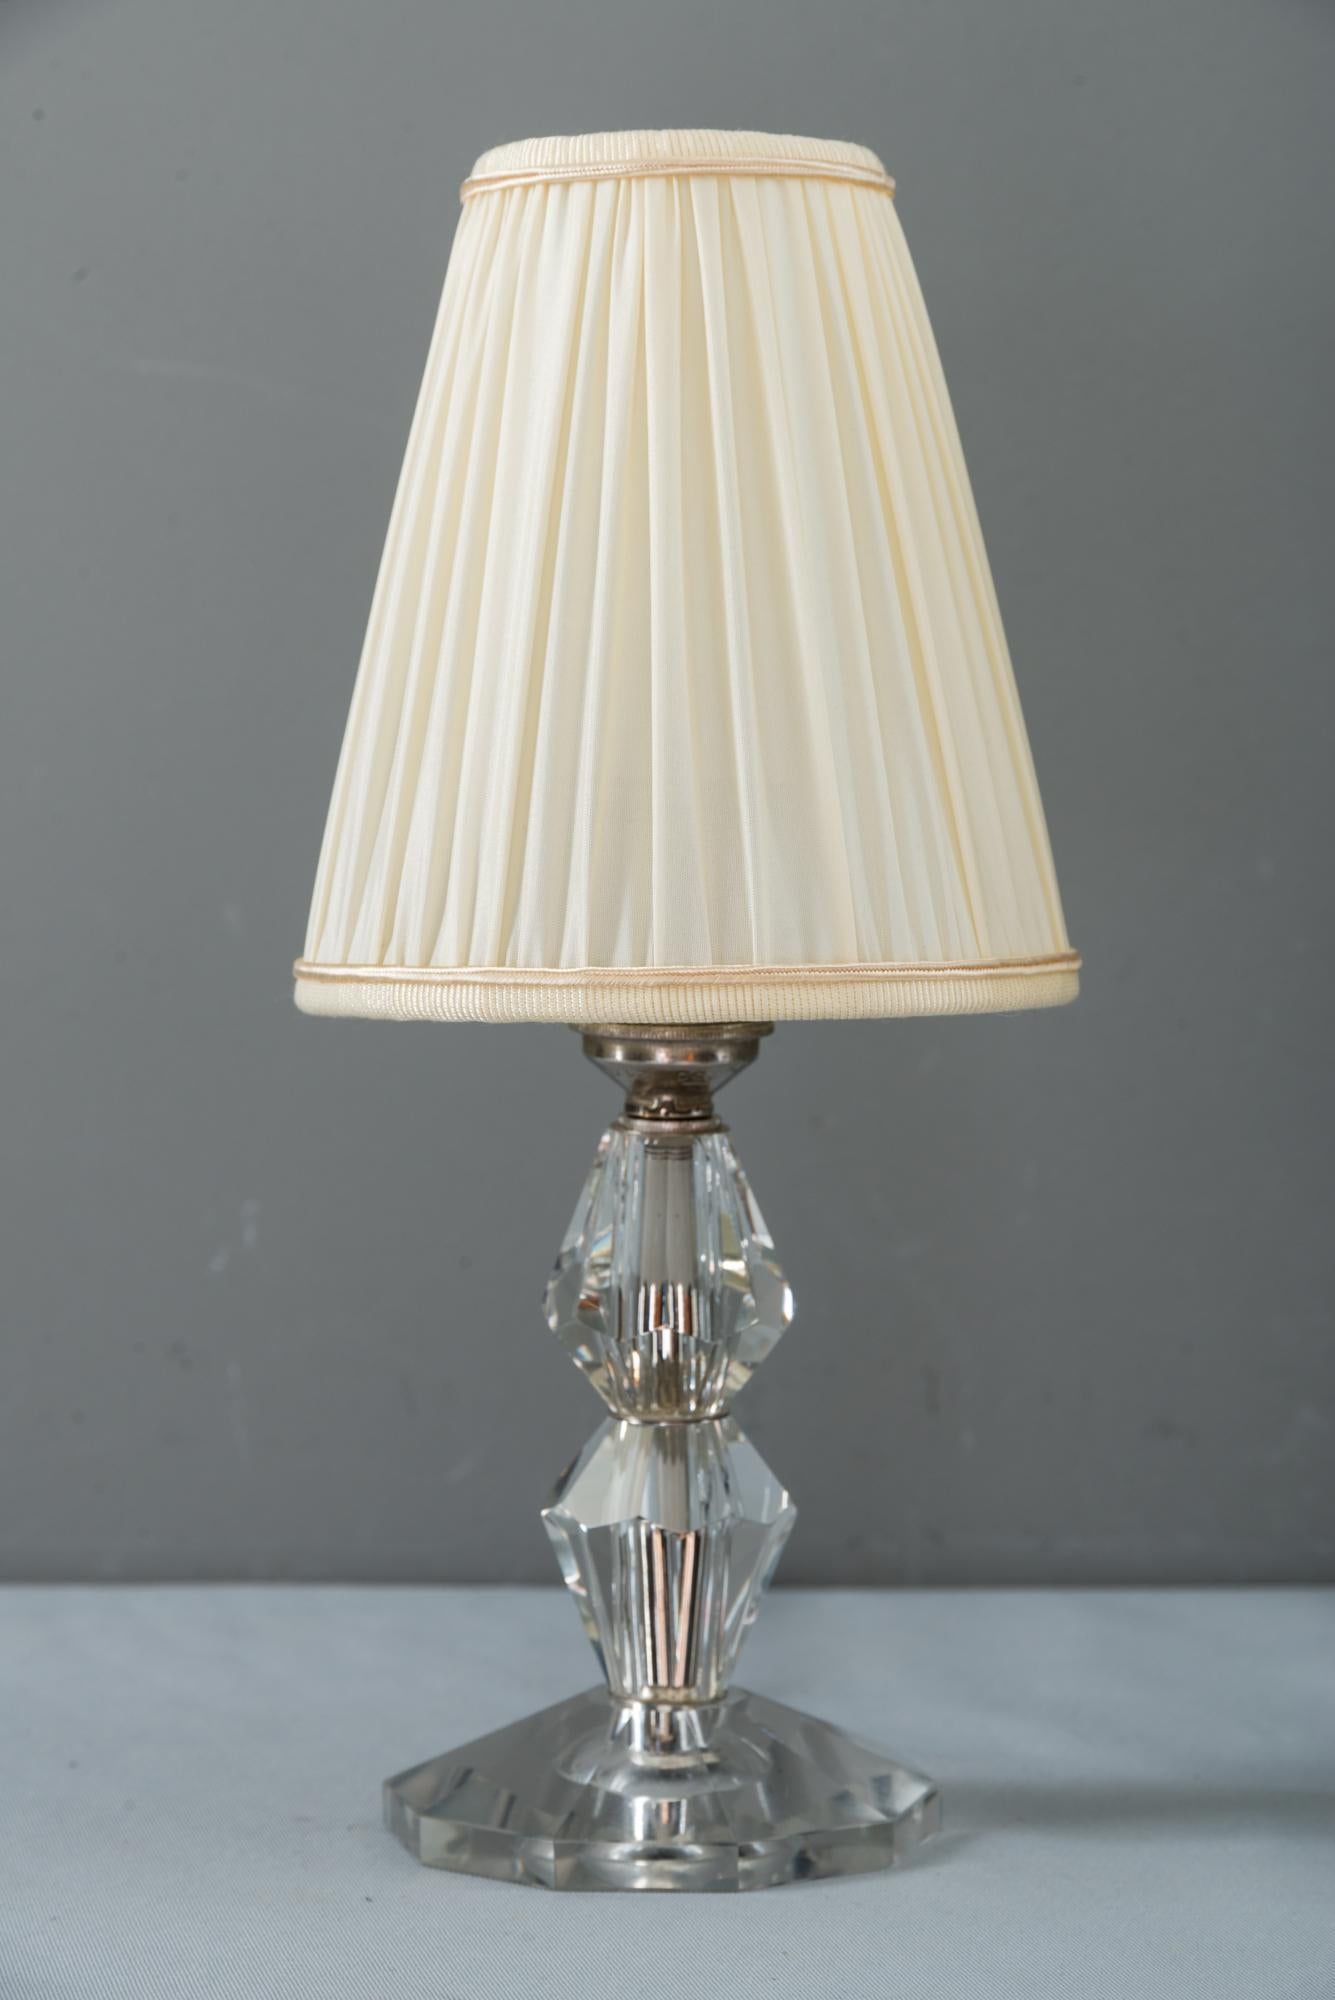 Two Bakalowits table lamps circa 1950s
Glass, nickel-plated and fabric
Original condition
Fabric shade is replaced ( new ).